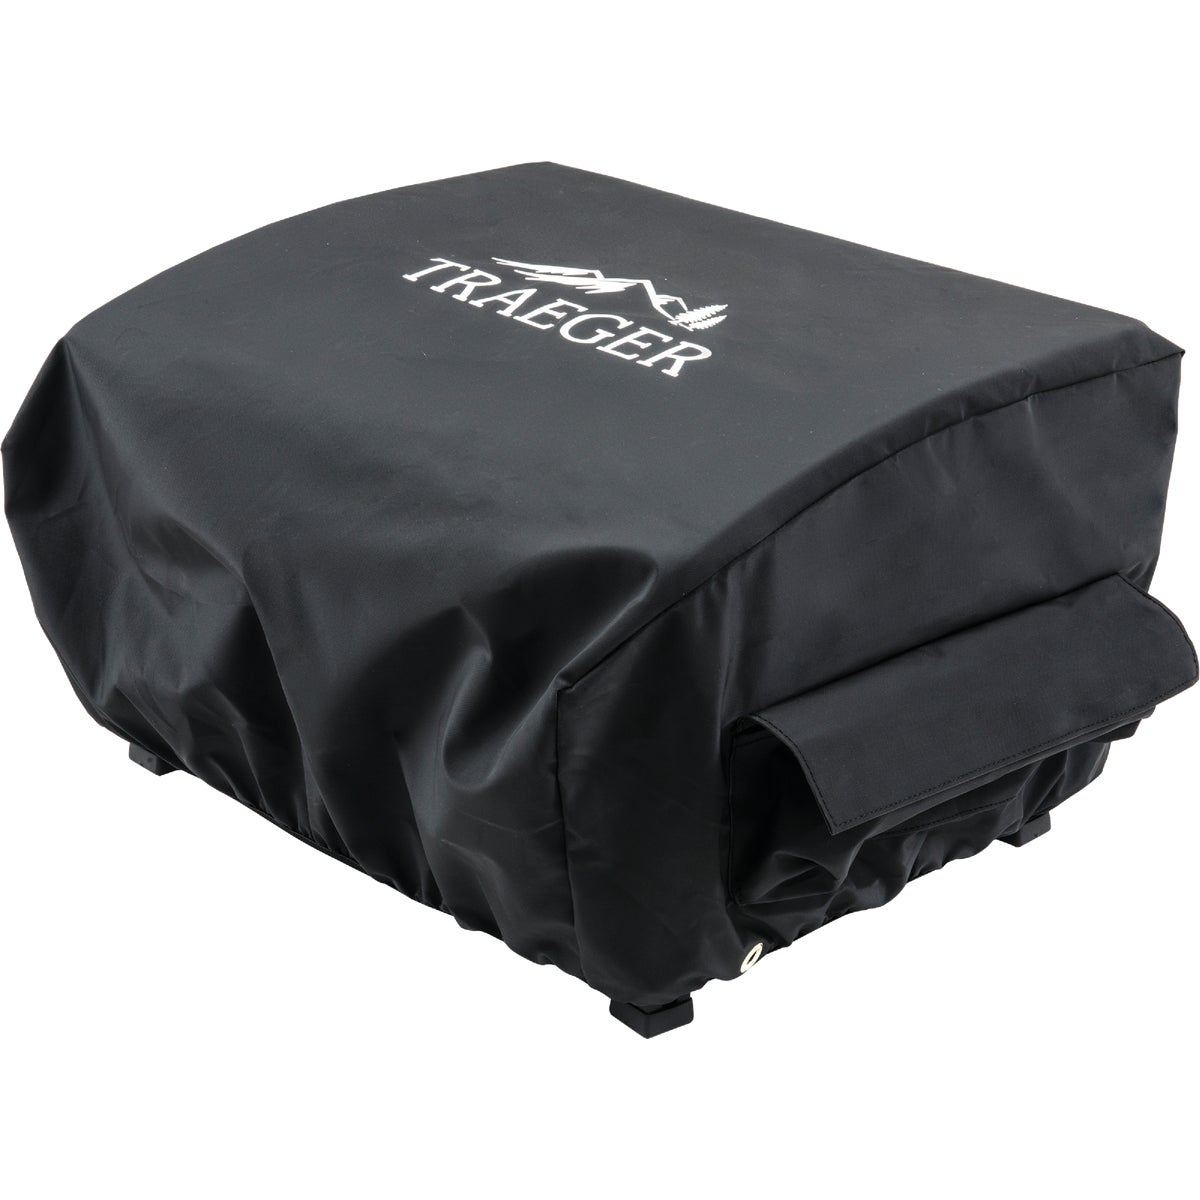 Traeger Scout & Ranger 21 In. Black All-Weather Grill Cover